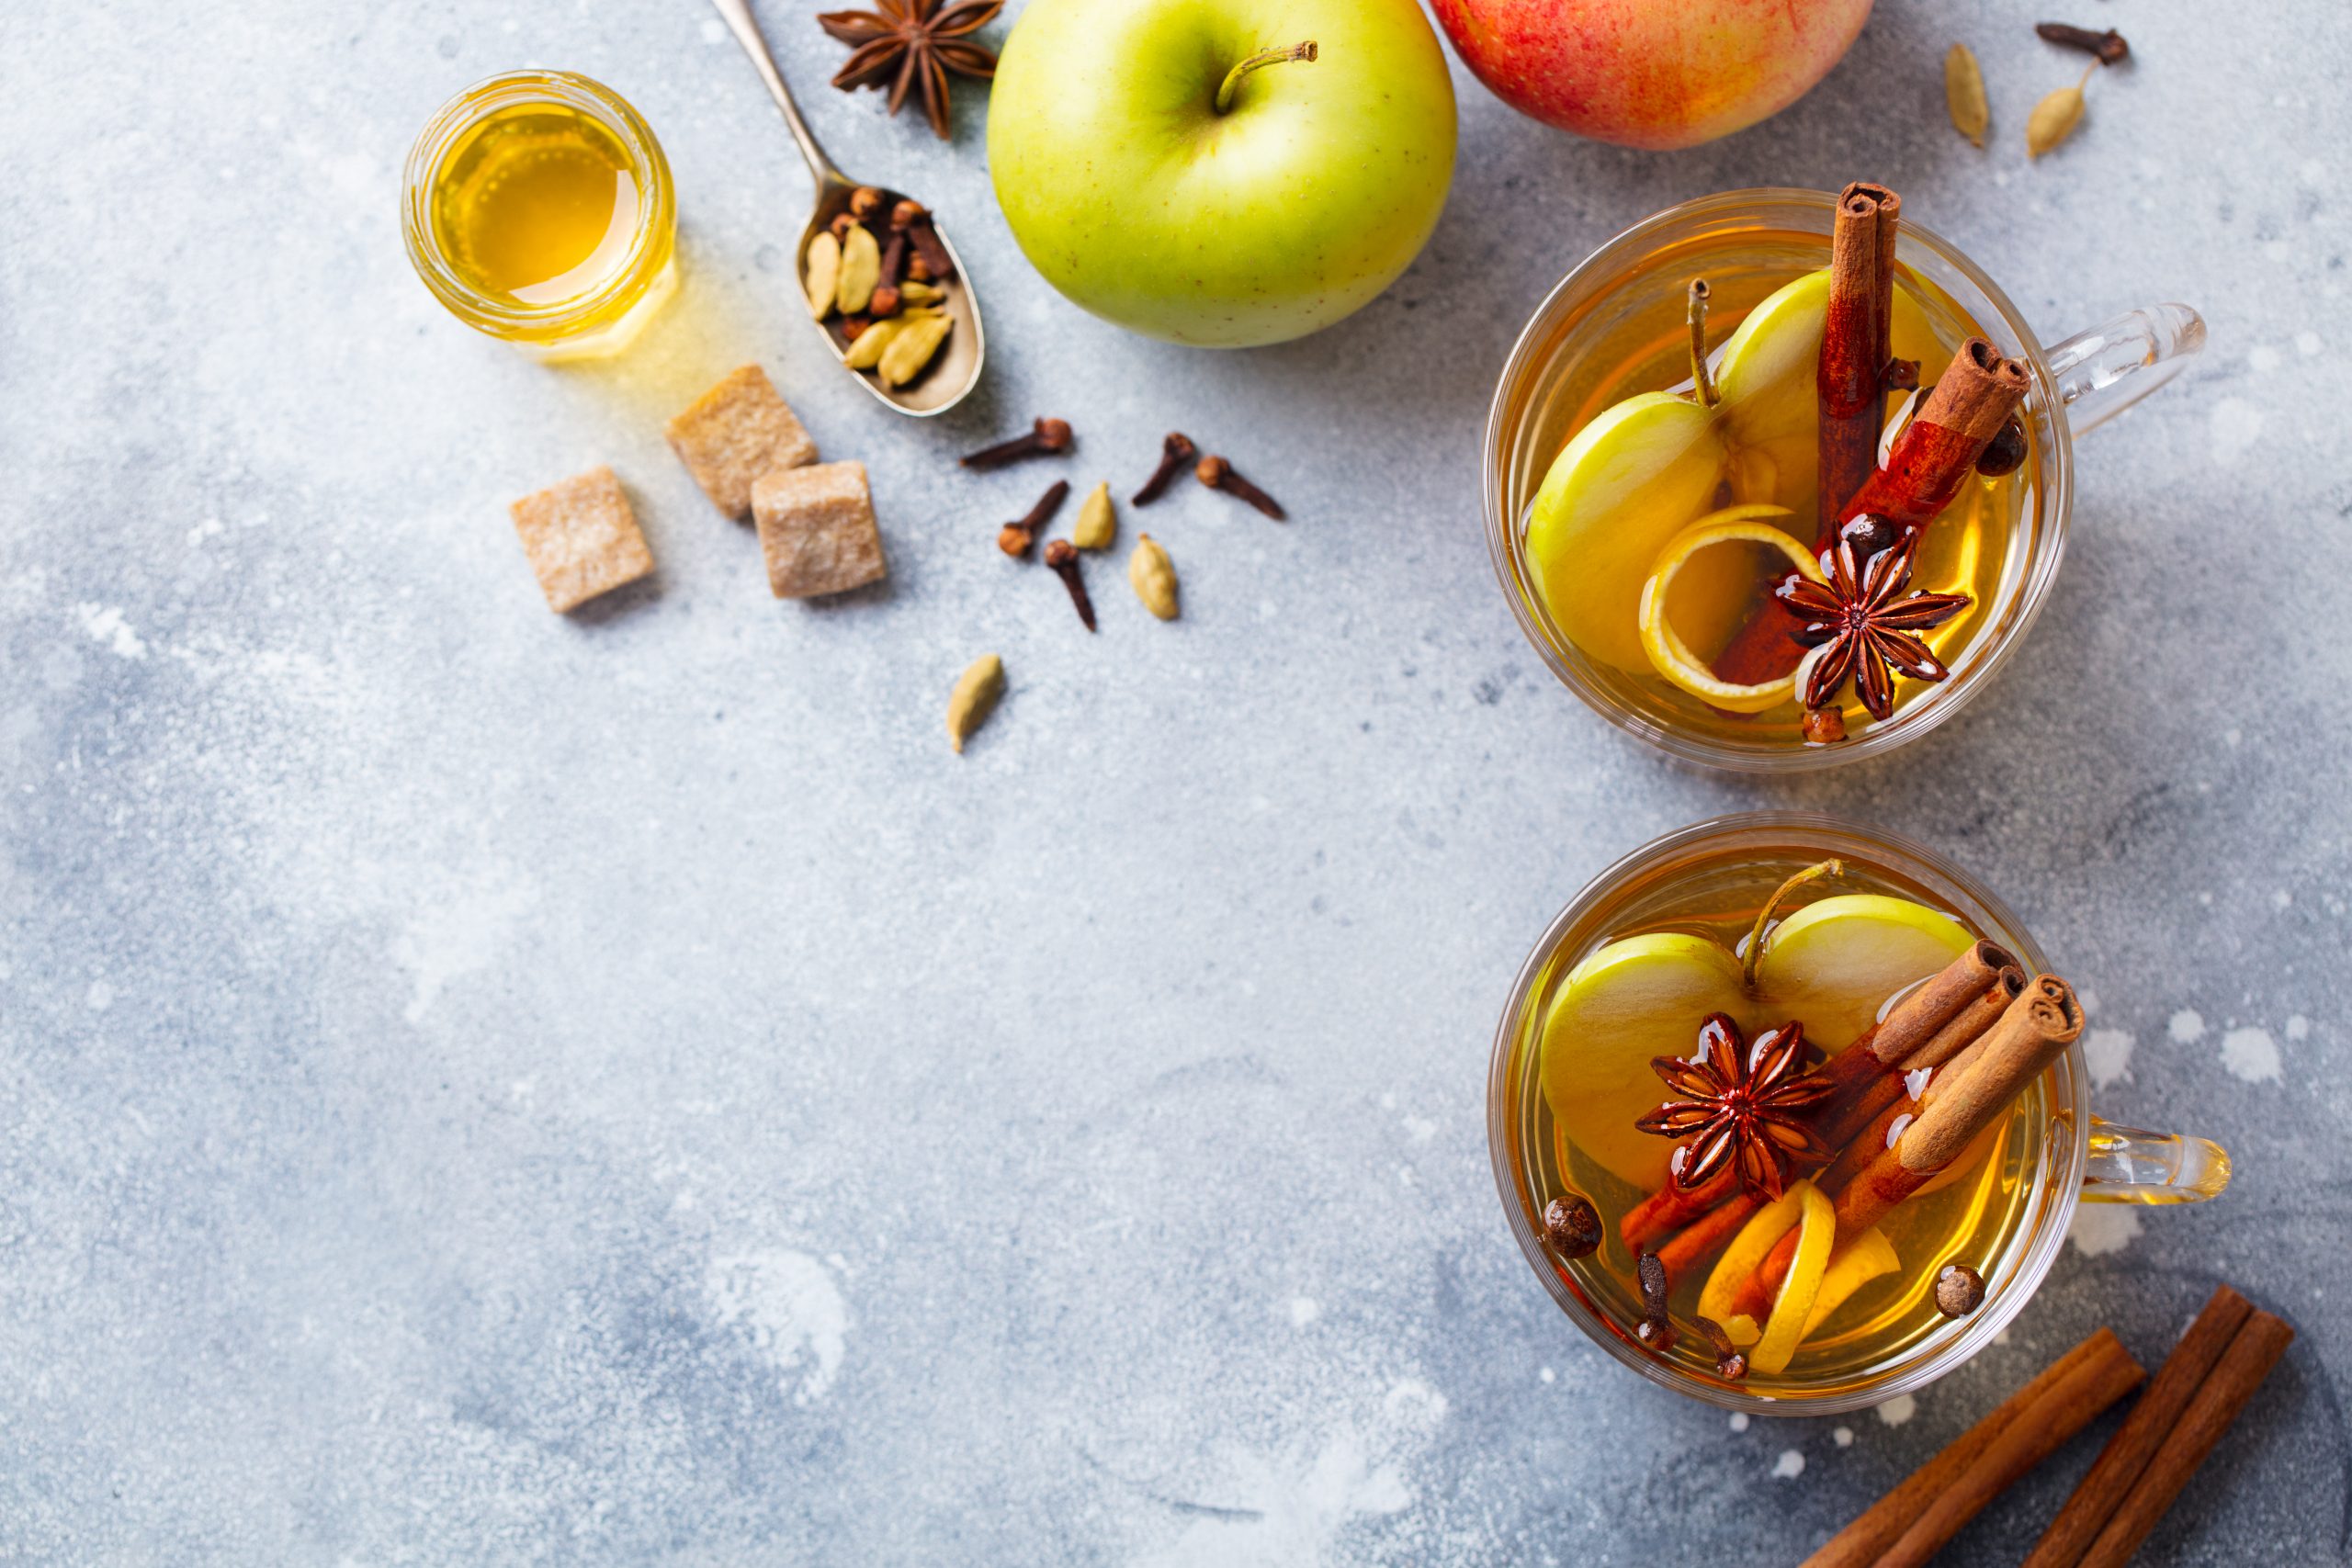 Apple,Mulled,Cider,With,Spices,In,Glass,Cup.,Grey,Stone